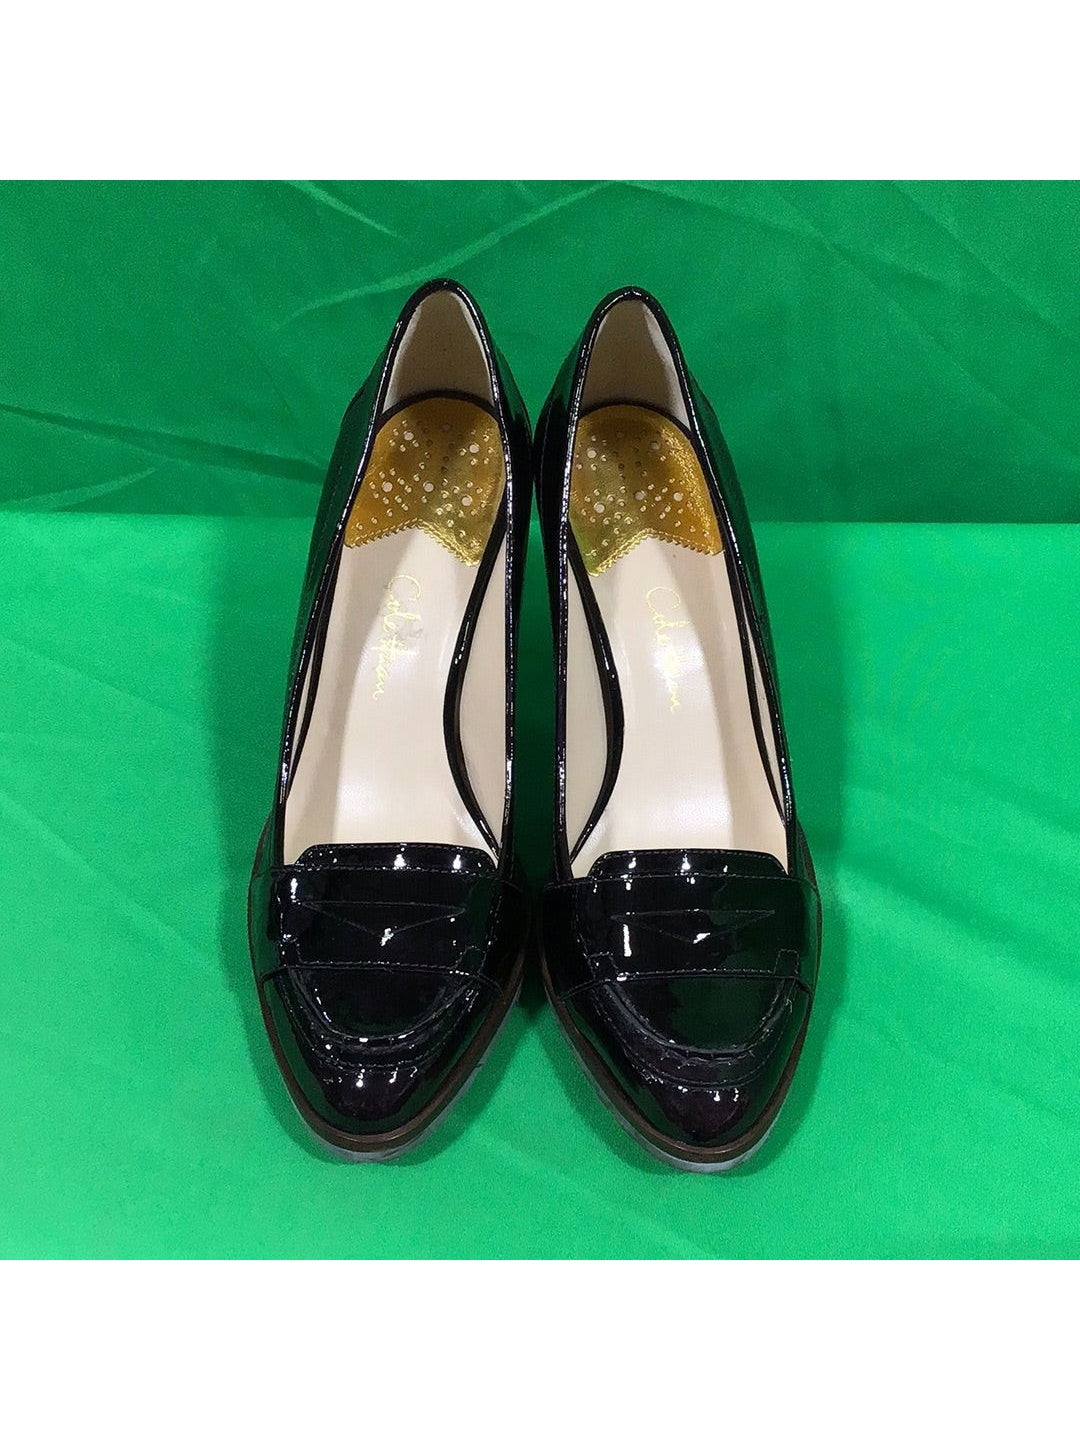 Cole Haan Ladies Size 8B Dark Brown Patent Leather High Heel Shoes - In Box - The Kennedy Collective Thrift - 